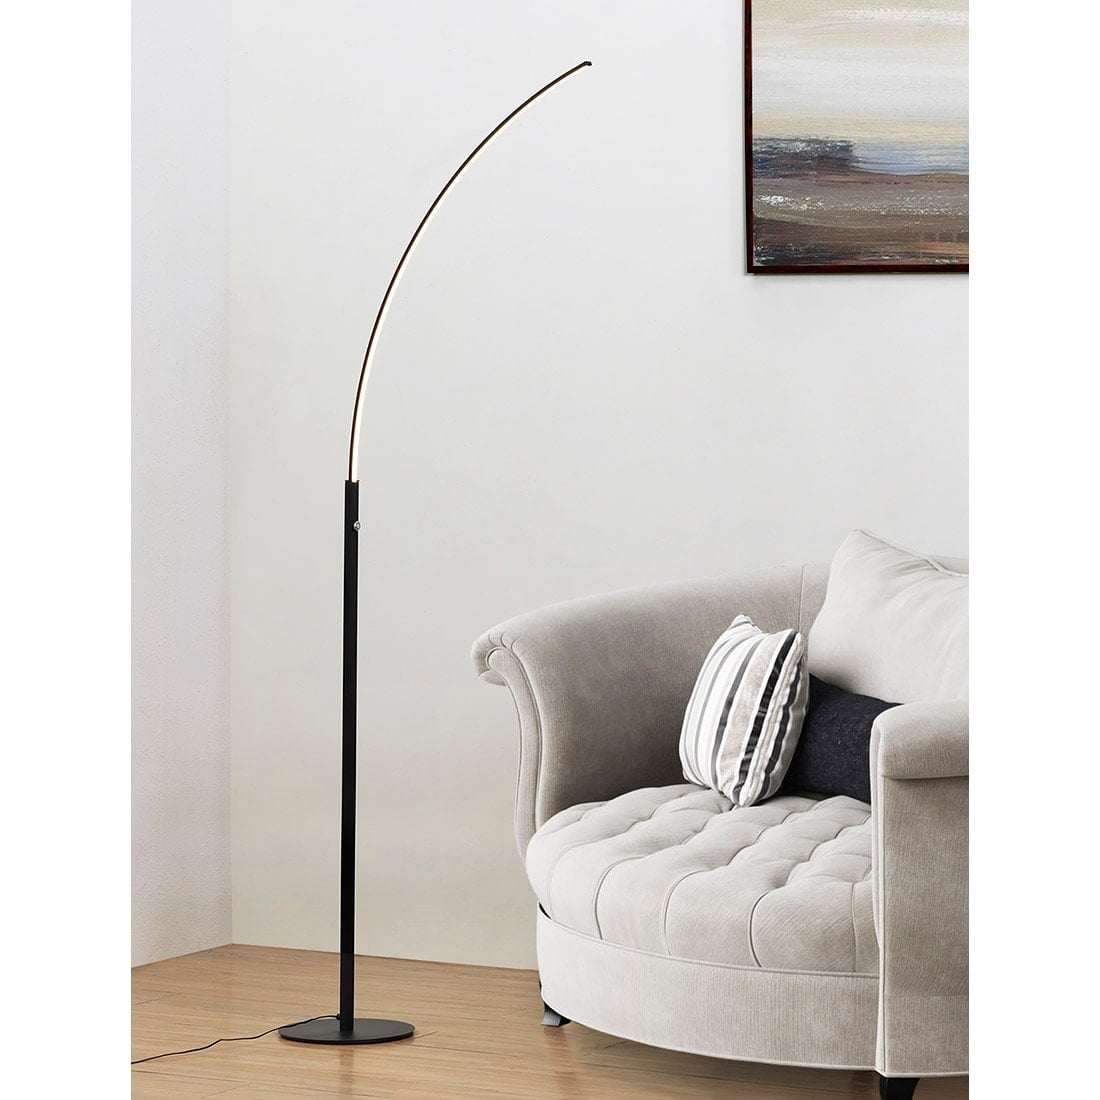 daylight24 402097-15 Arc LED Floor Lamps Silver 